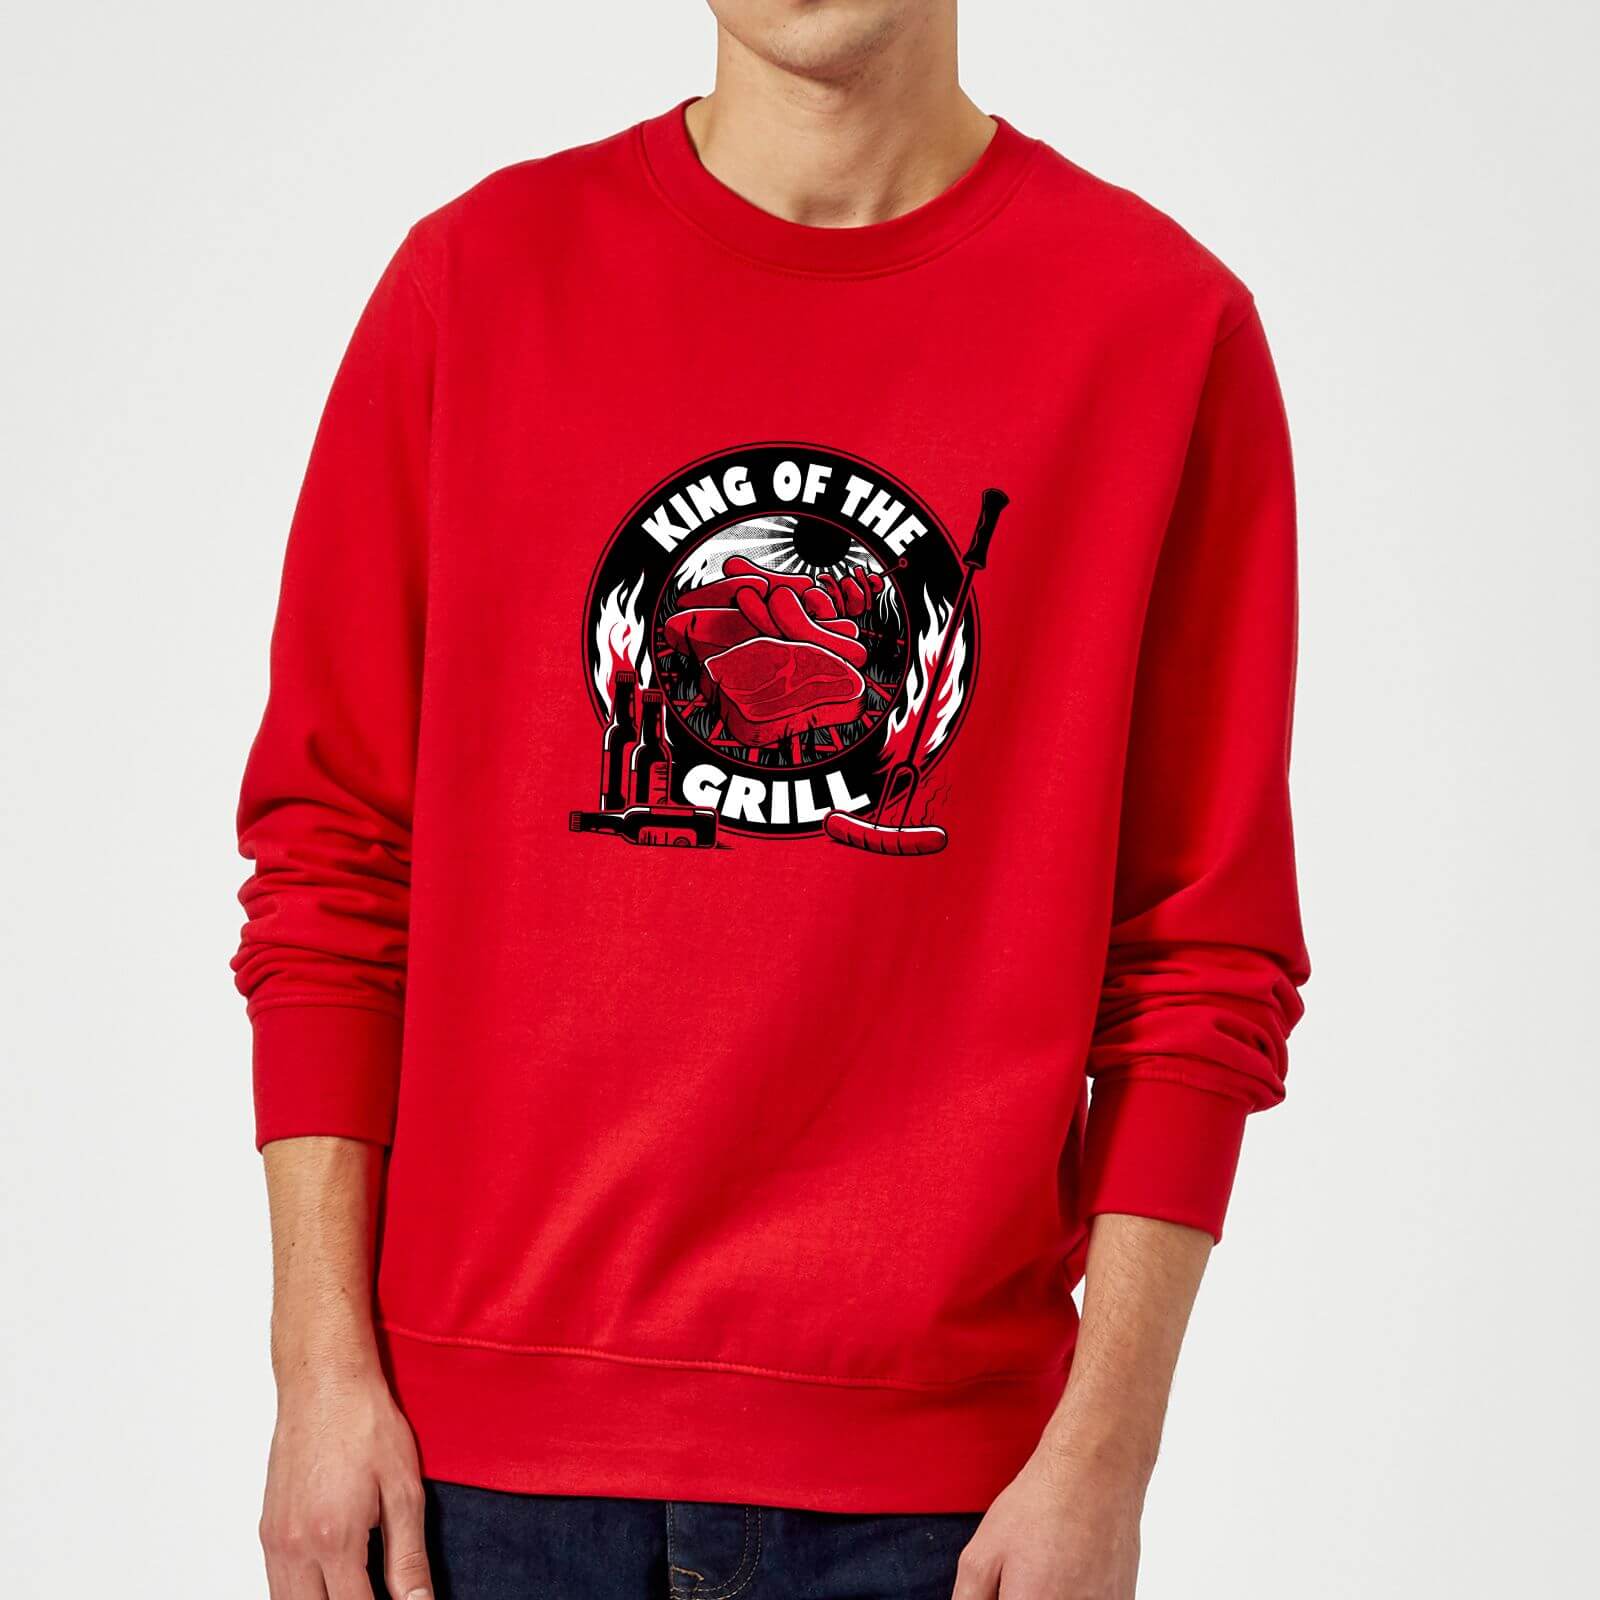 King Of The Grill Sweatshirt - Red - M - Red